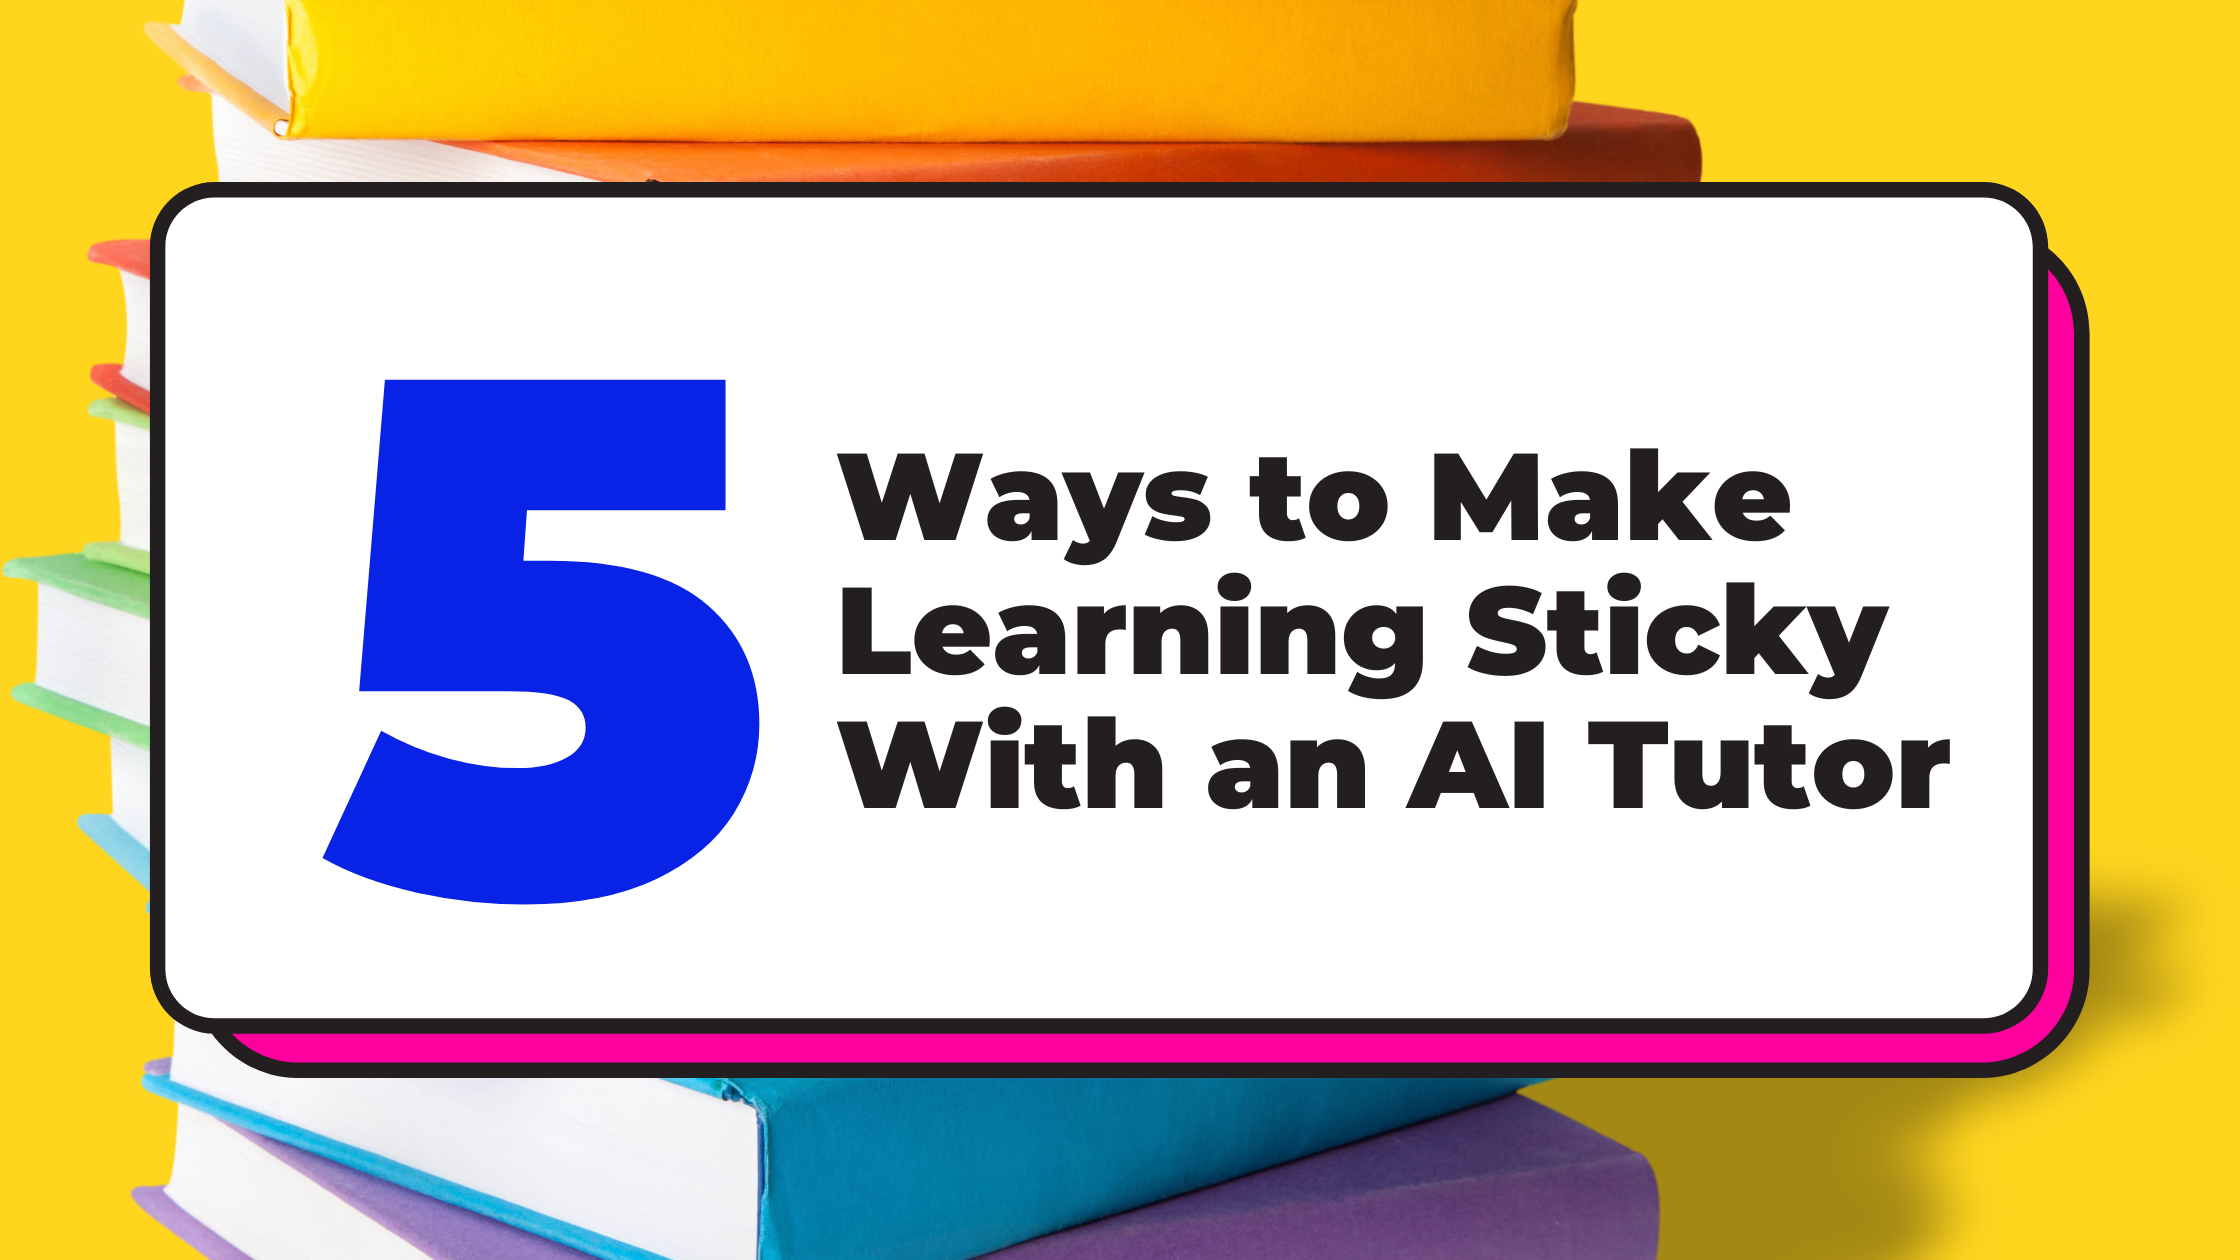 5 Ways to Make Learning Sticky With an AI Tutor